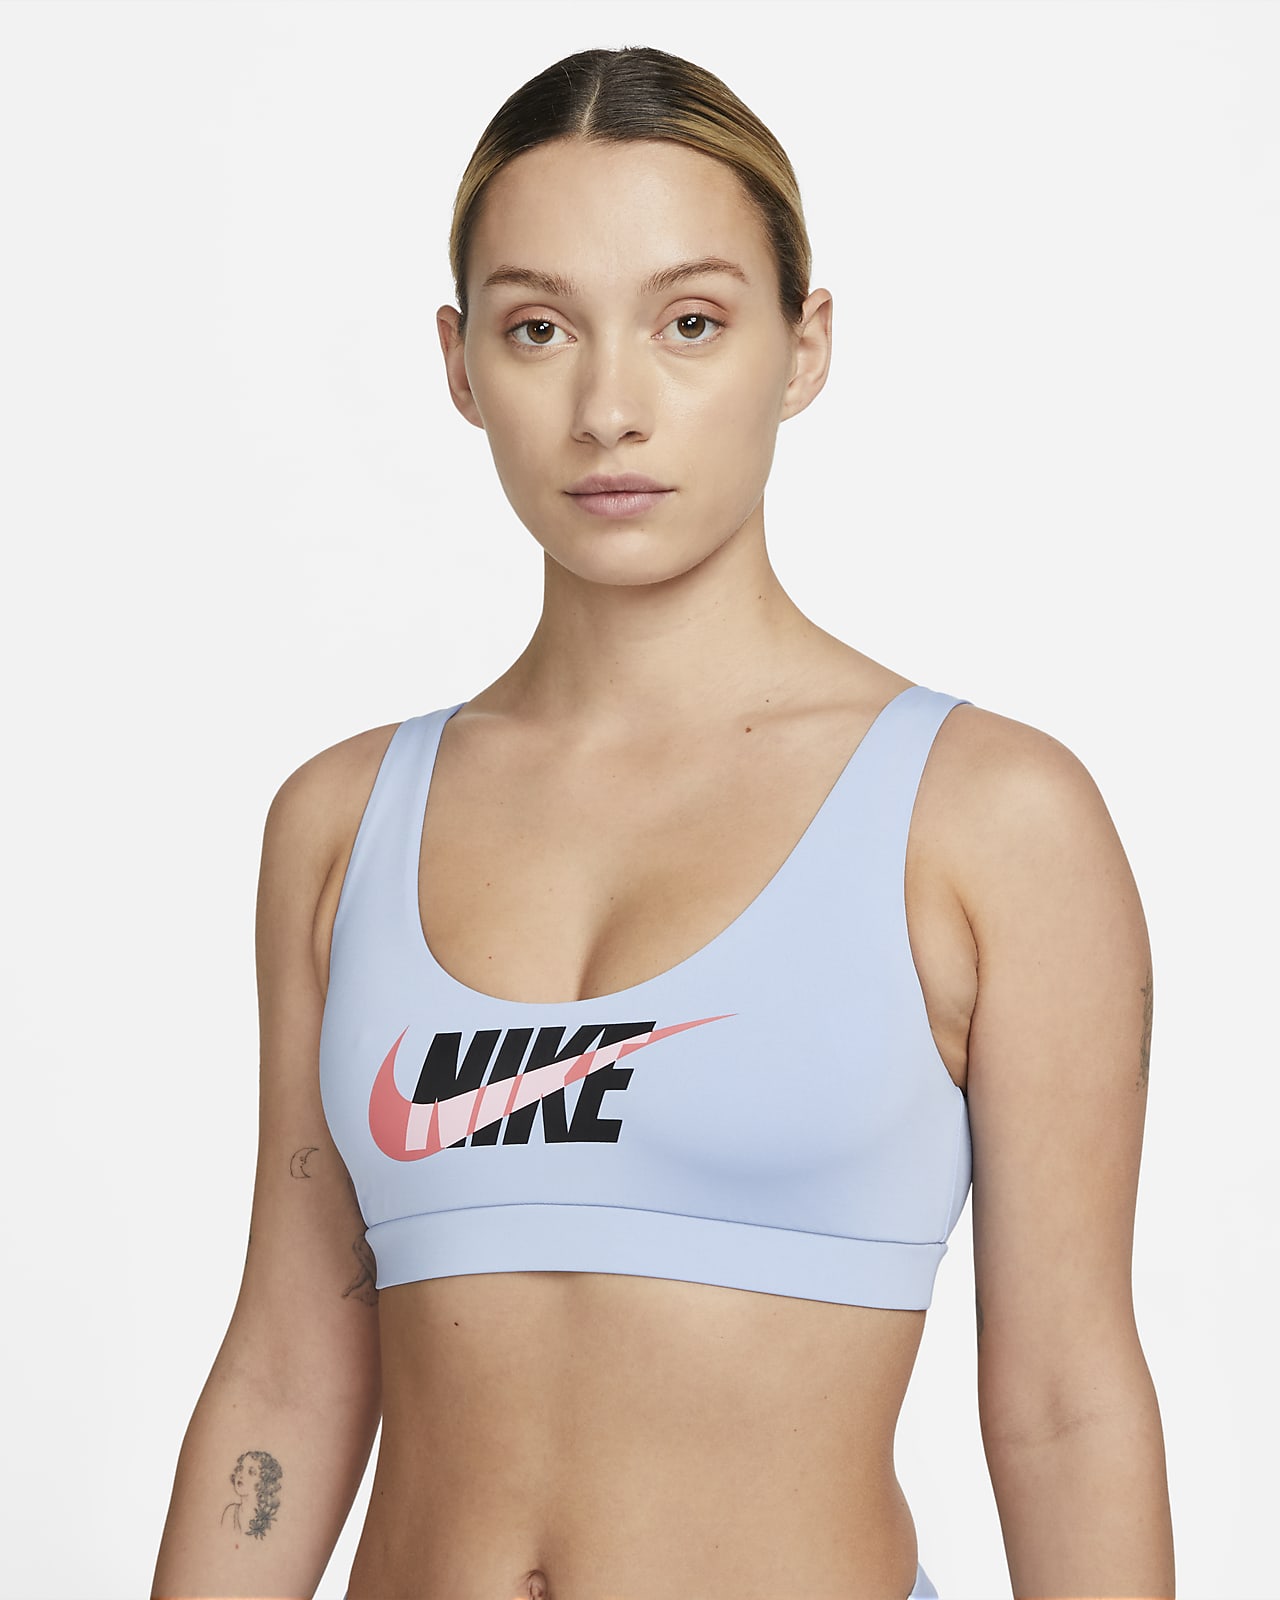 Nike Sports Bras for sale in Los Angeles, California